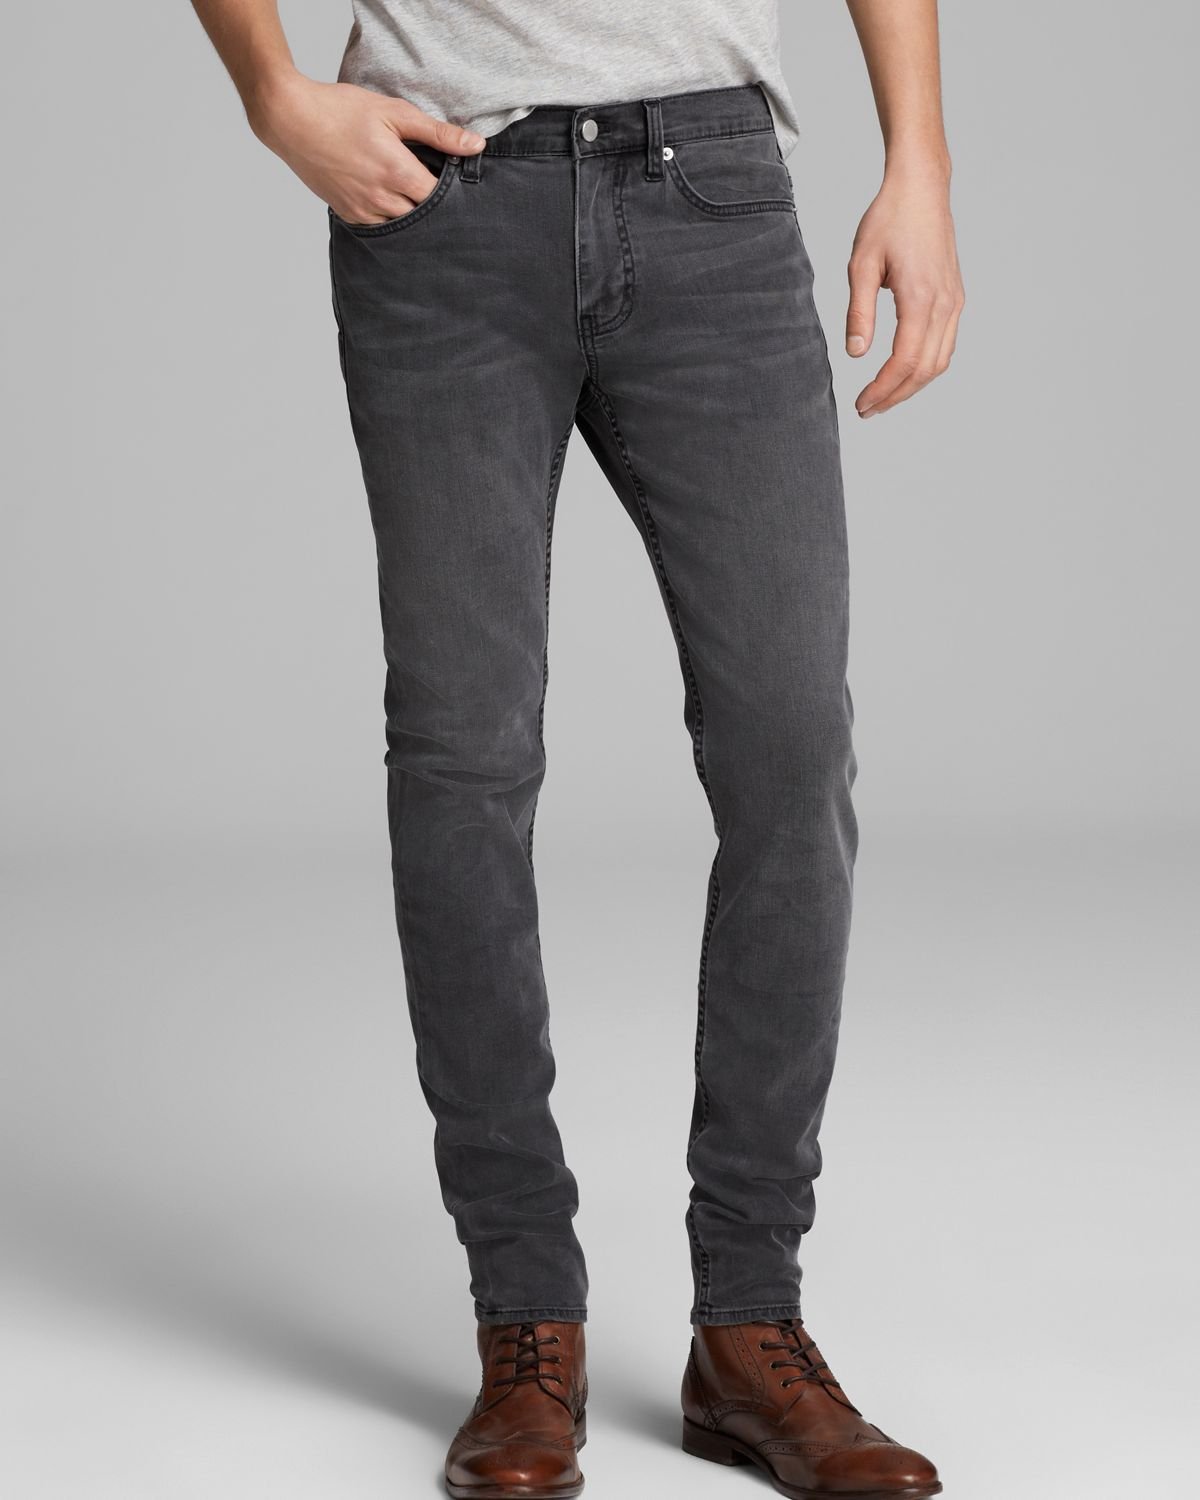 Blk Dnm Gray Jeans Slim Fit In Classic Wash Grey Product 1 17226637 0 033990006 Normal 